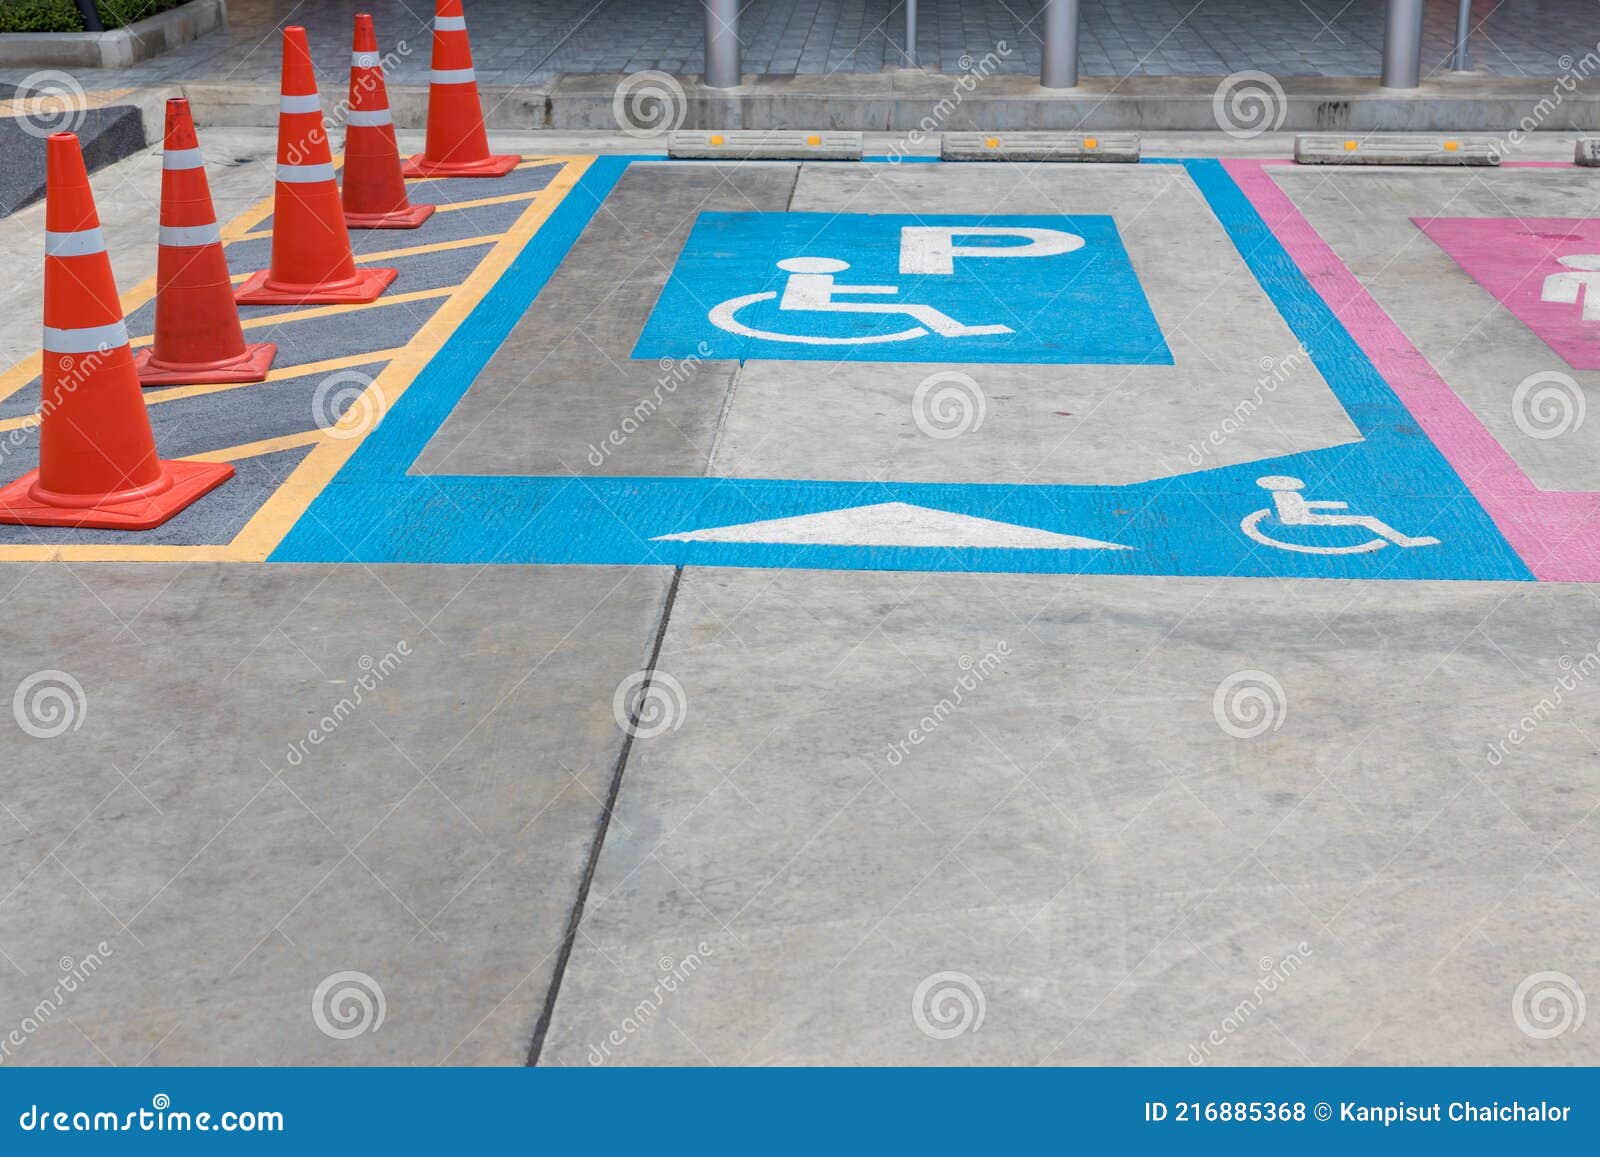 DISABLED PARKING SPACE LOGO WHEELCHAIR PAINTED LINE CAR PARK MARKING 